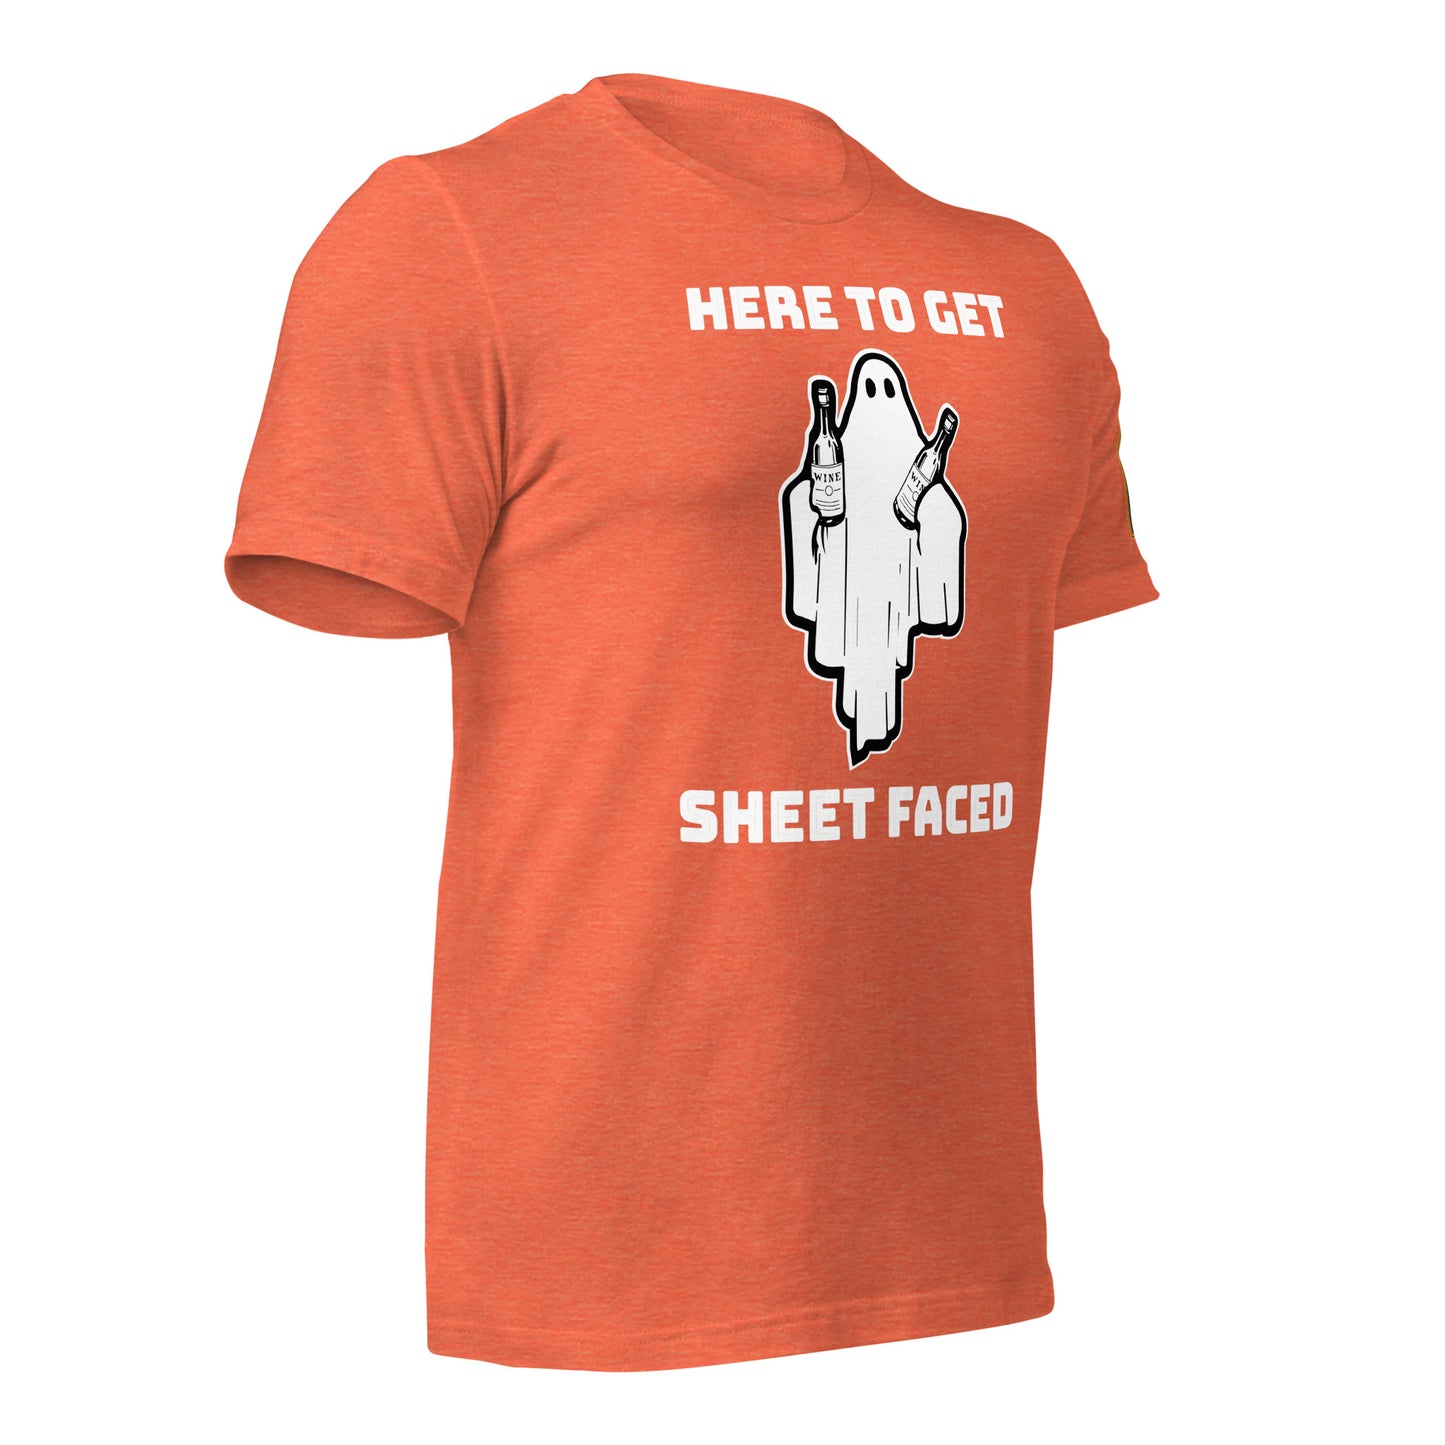 HERE TO GET SHEET FACED - WHITE FONT - BELLA+CANVAS - Unisex t-shirt